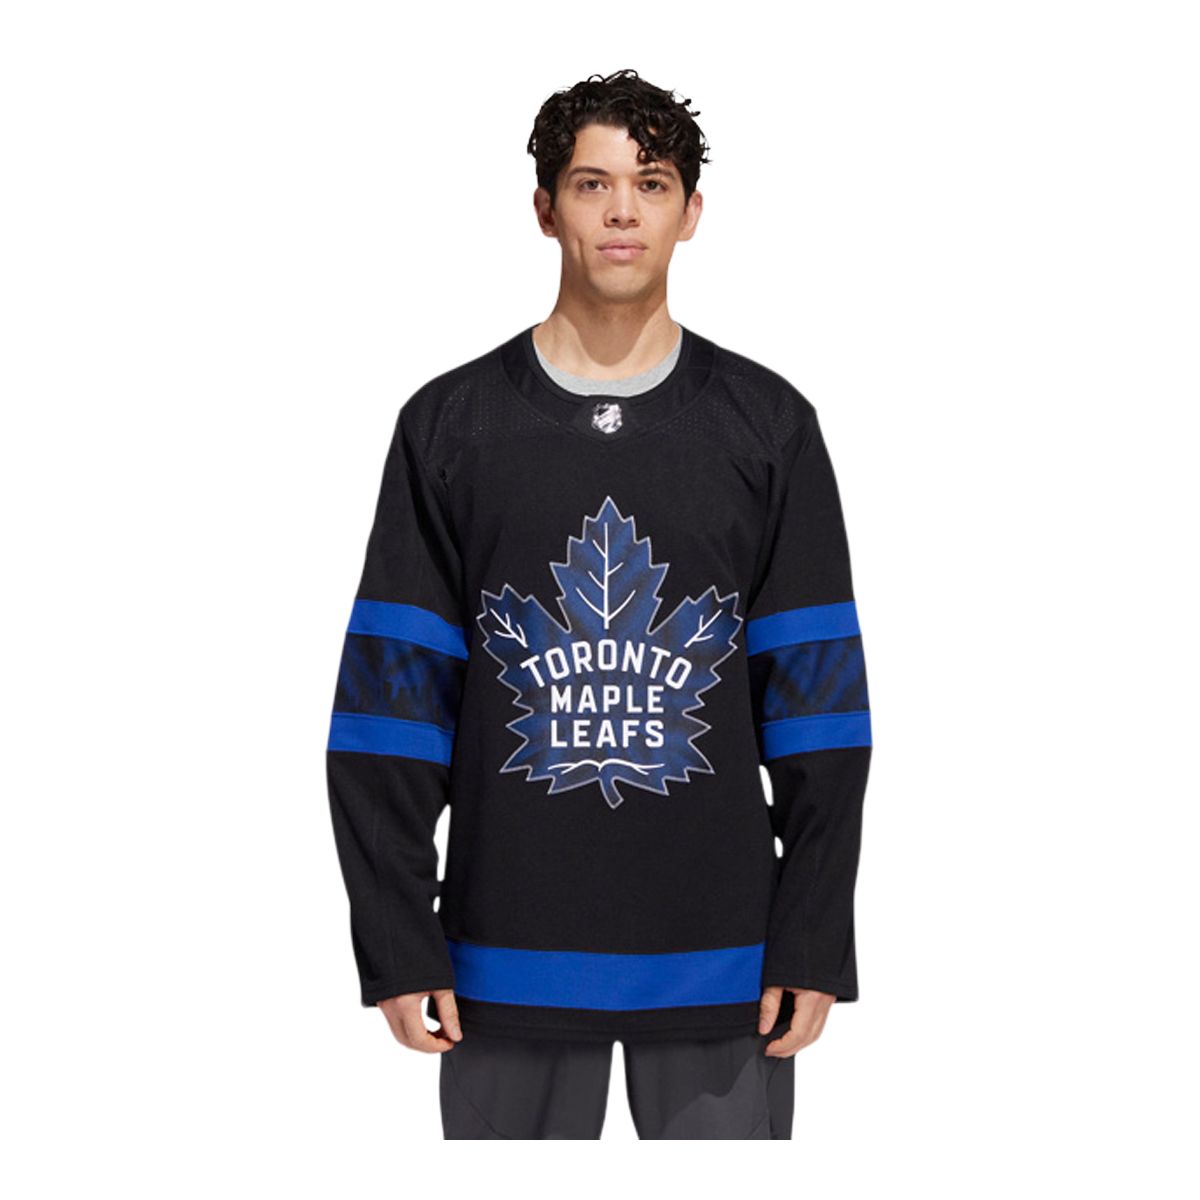 Drew house Justin Bieber and Maple Leafs shirt - Yeswefollow